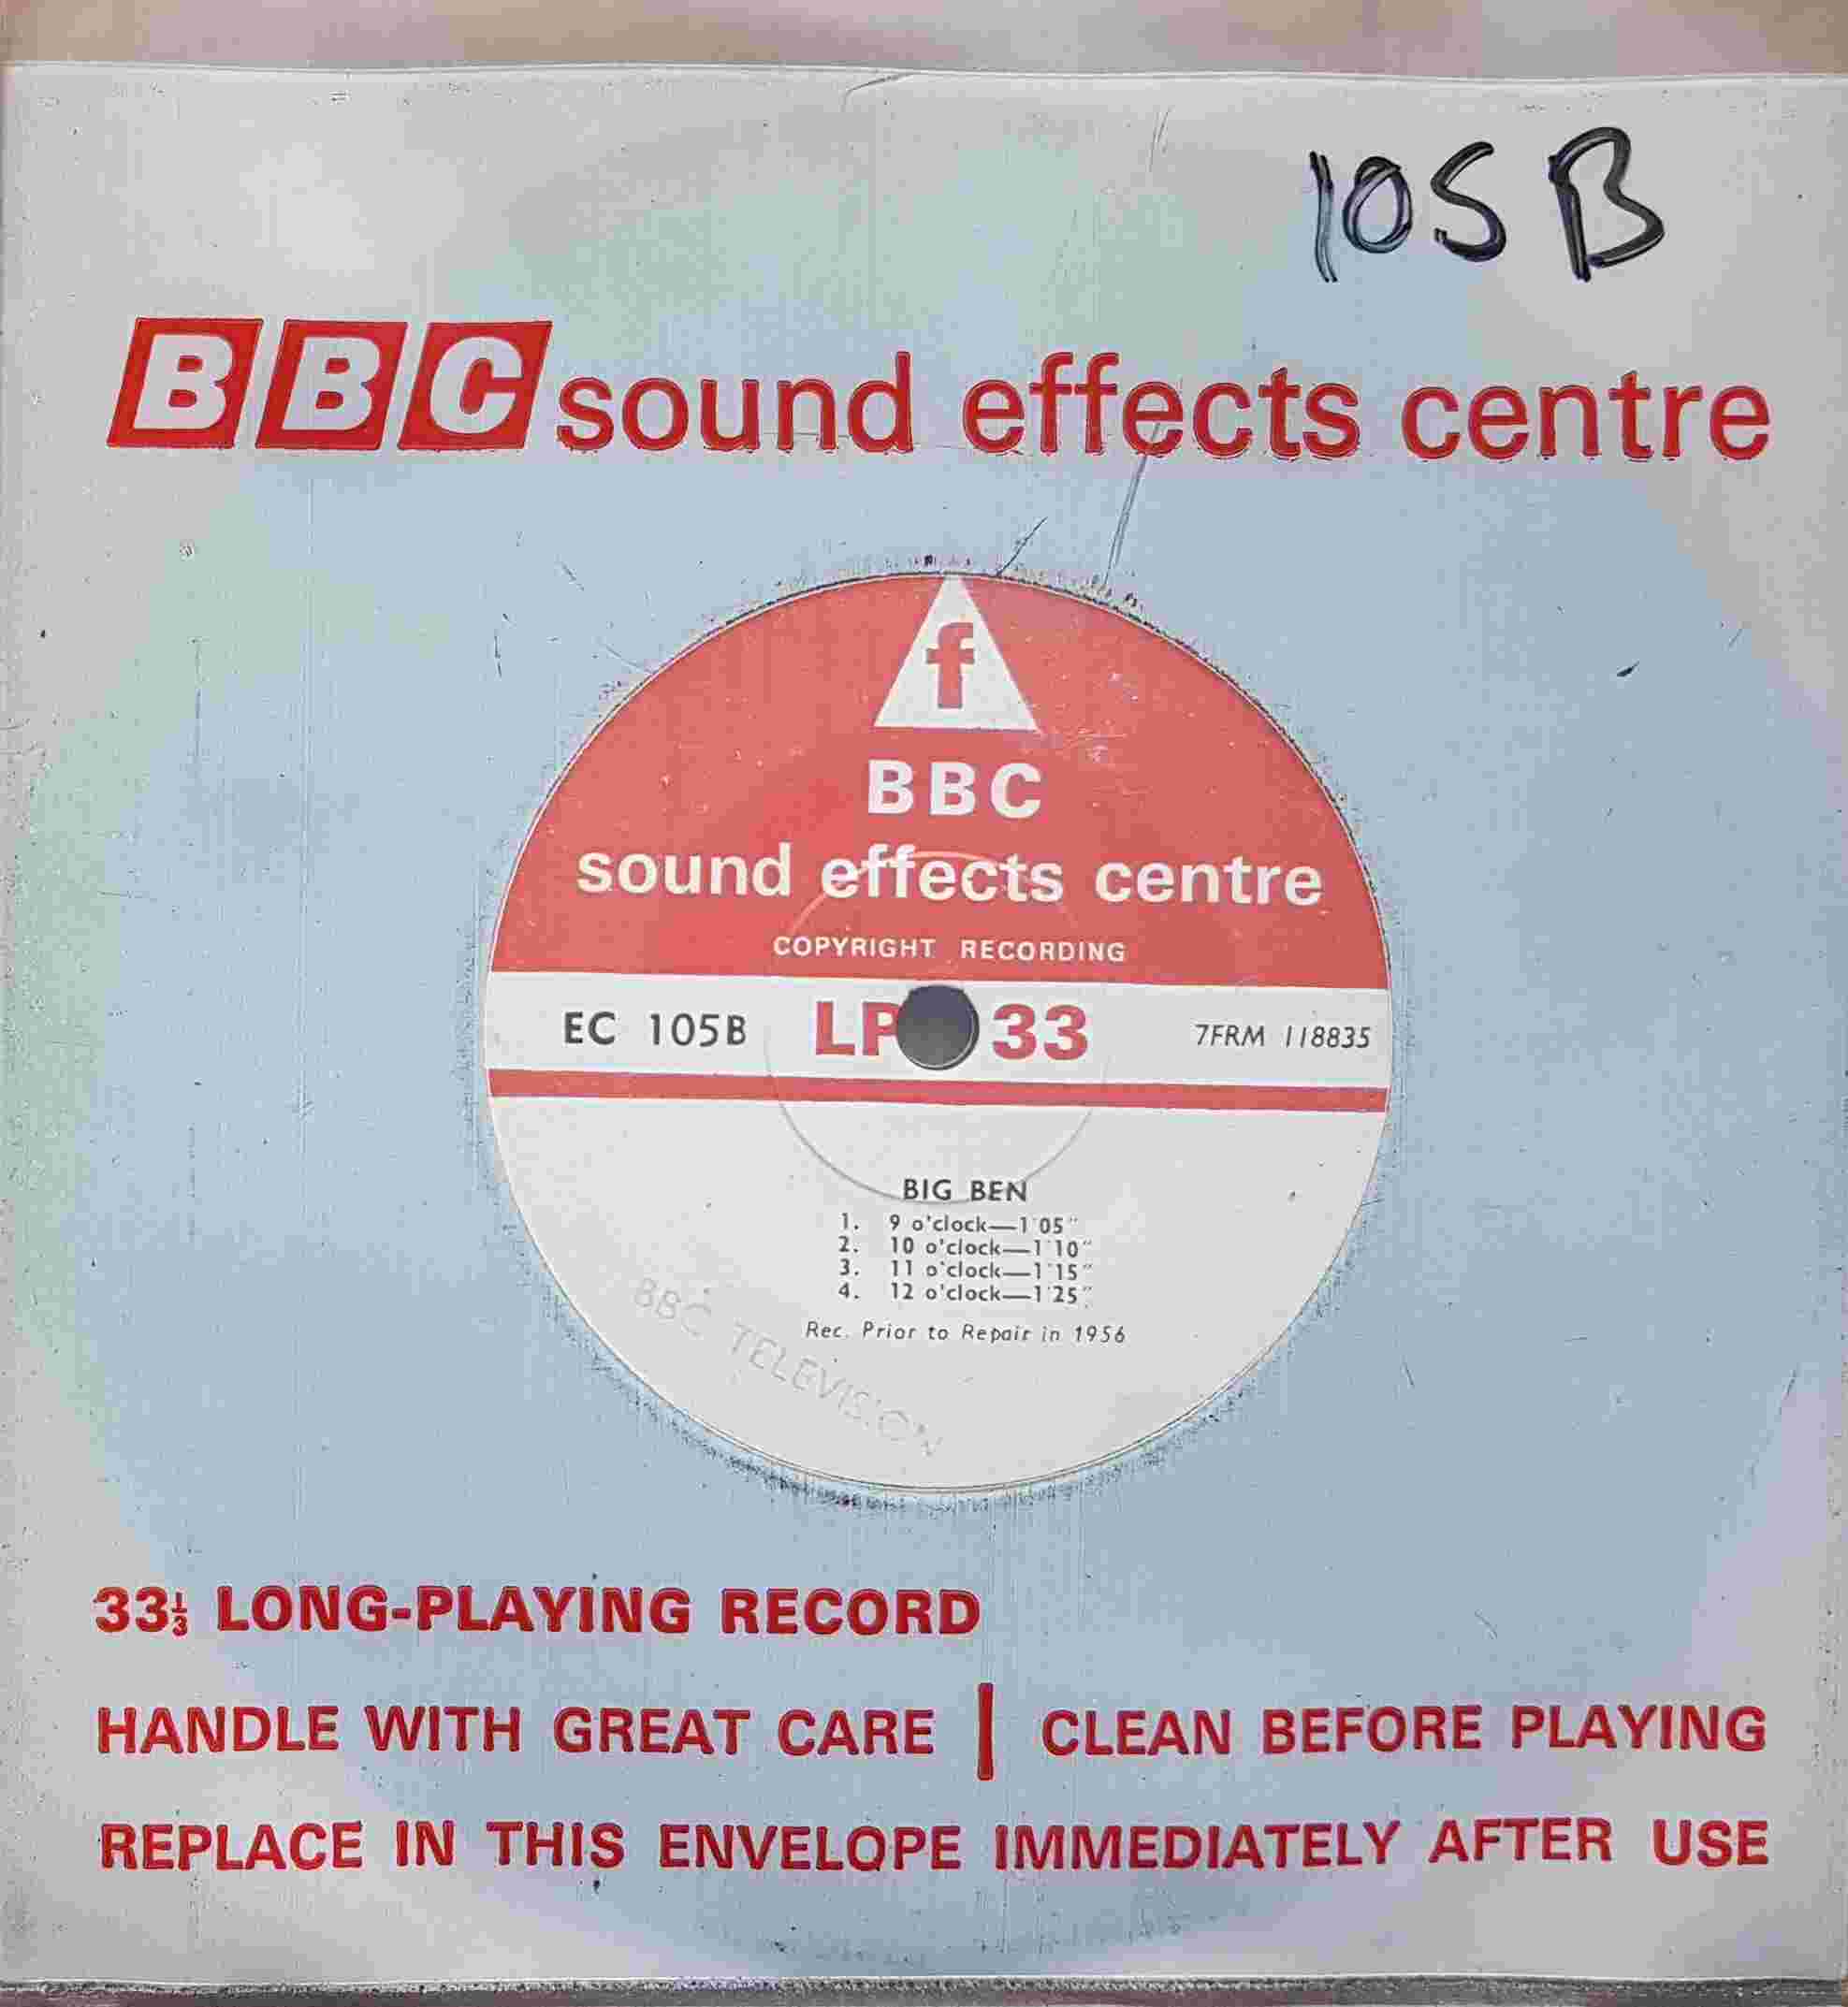 Picture of EC 105B Big Ben / Time signals & Clocks by artist Not registered from the BBC singles - Records and Tapes library